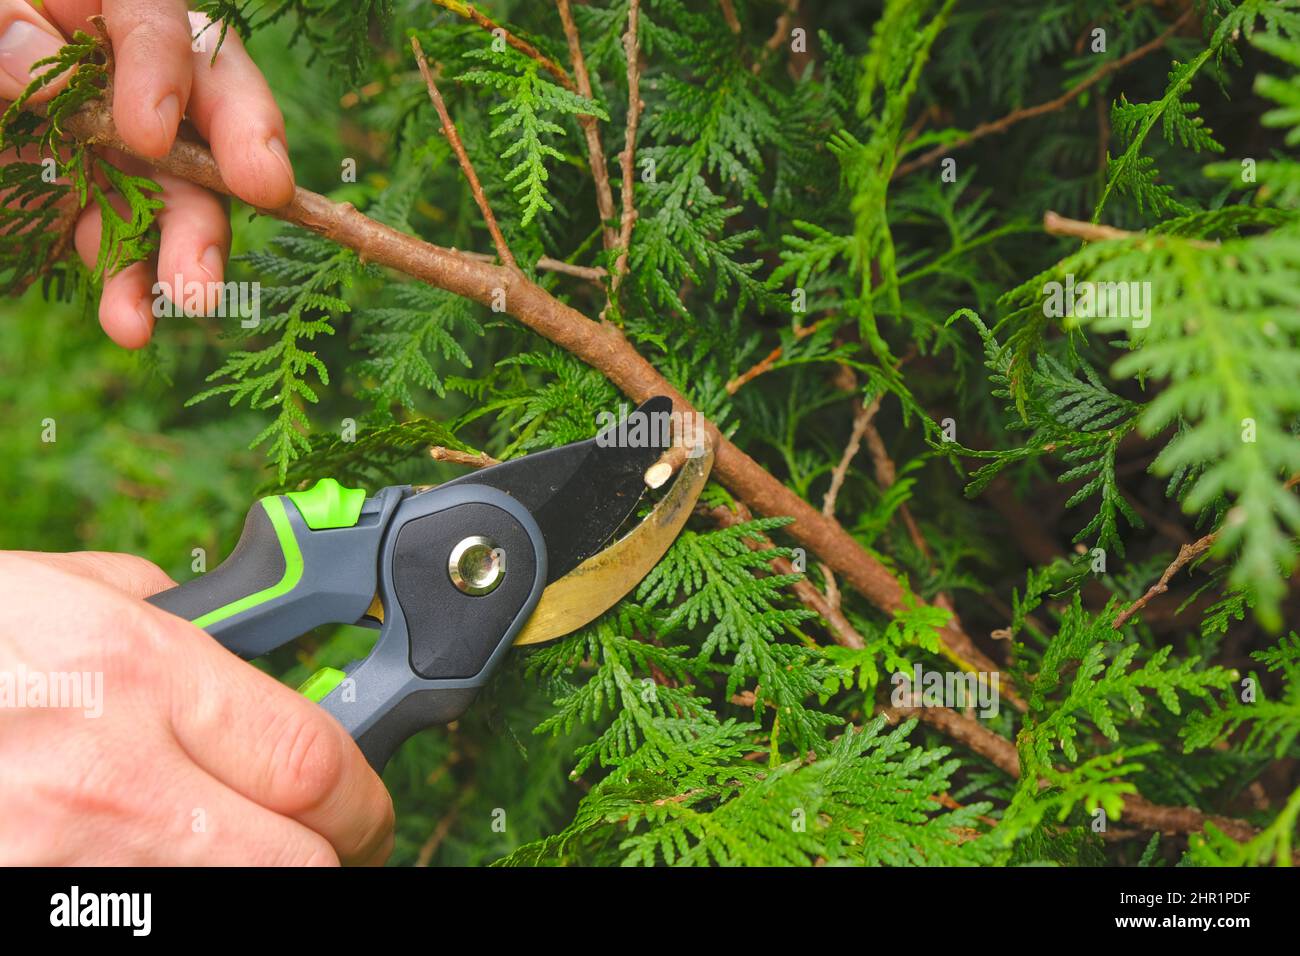 Pruning thuja.Garden Plants Pruning Tool. Garden shears in hands cutting a hedge.Plant pruning.Gardening and plant formation.Gardening and farming Stock Photo